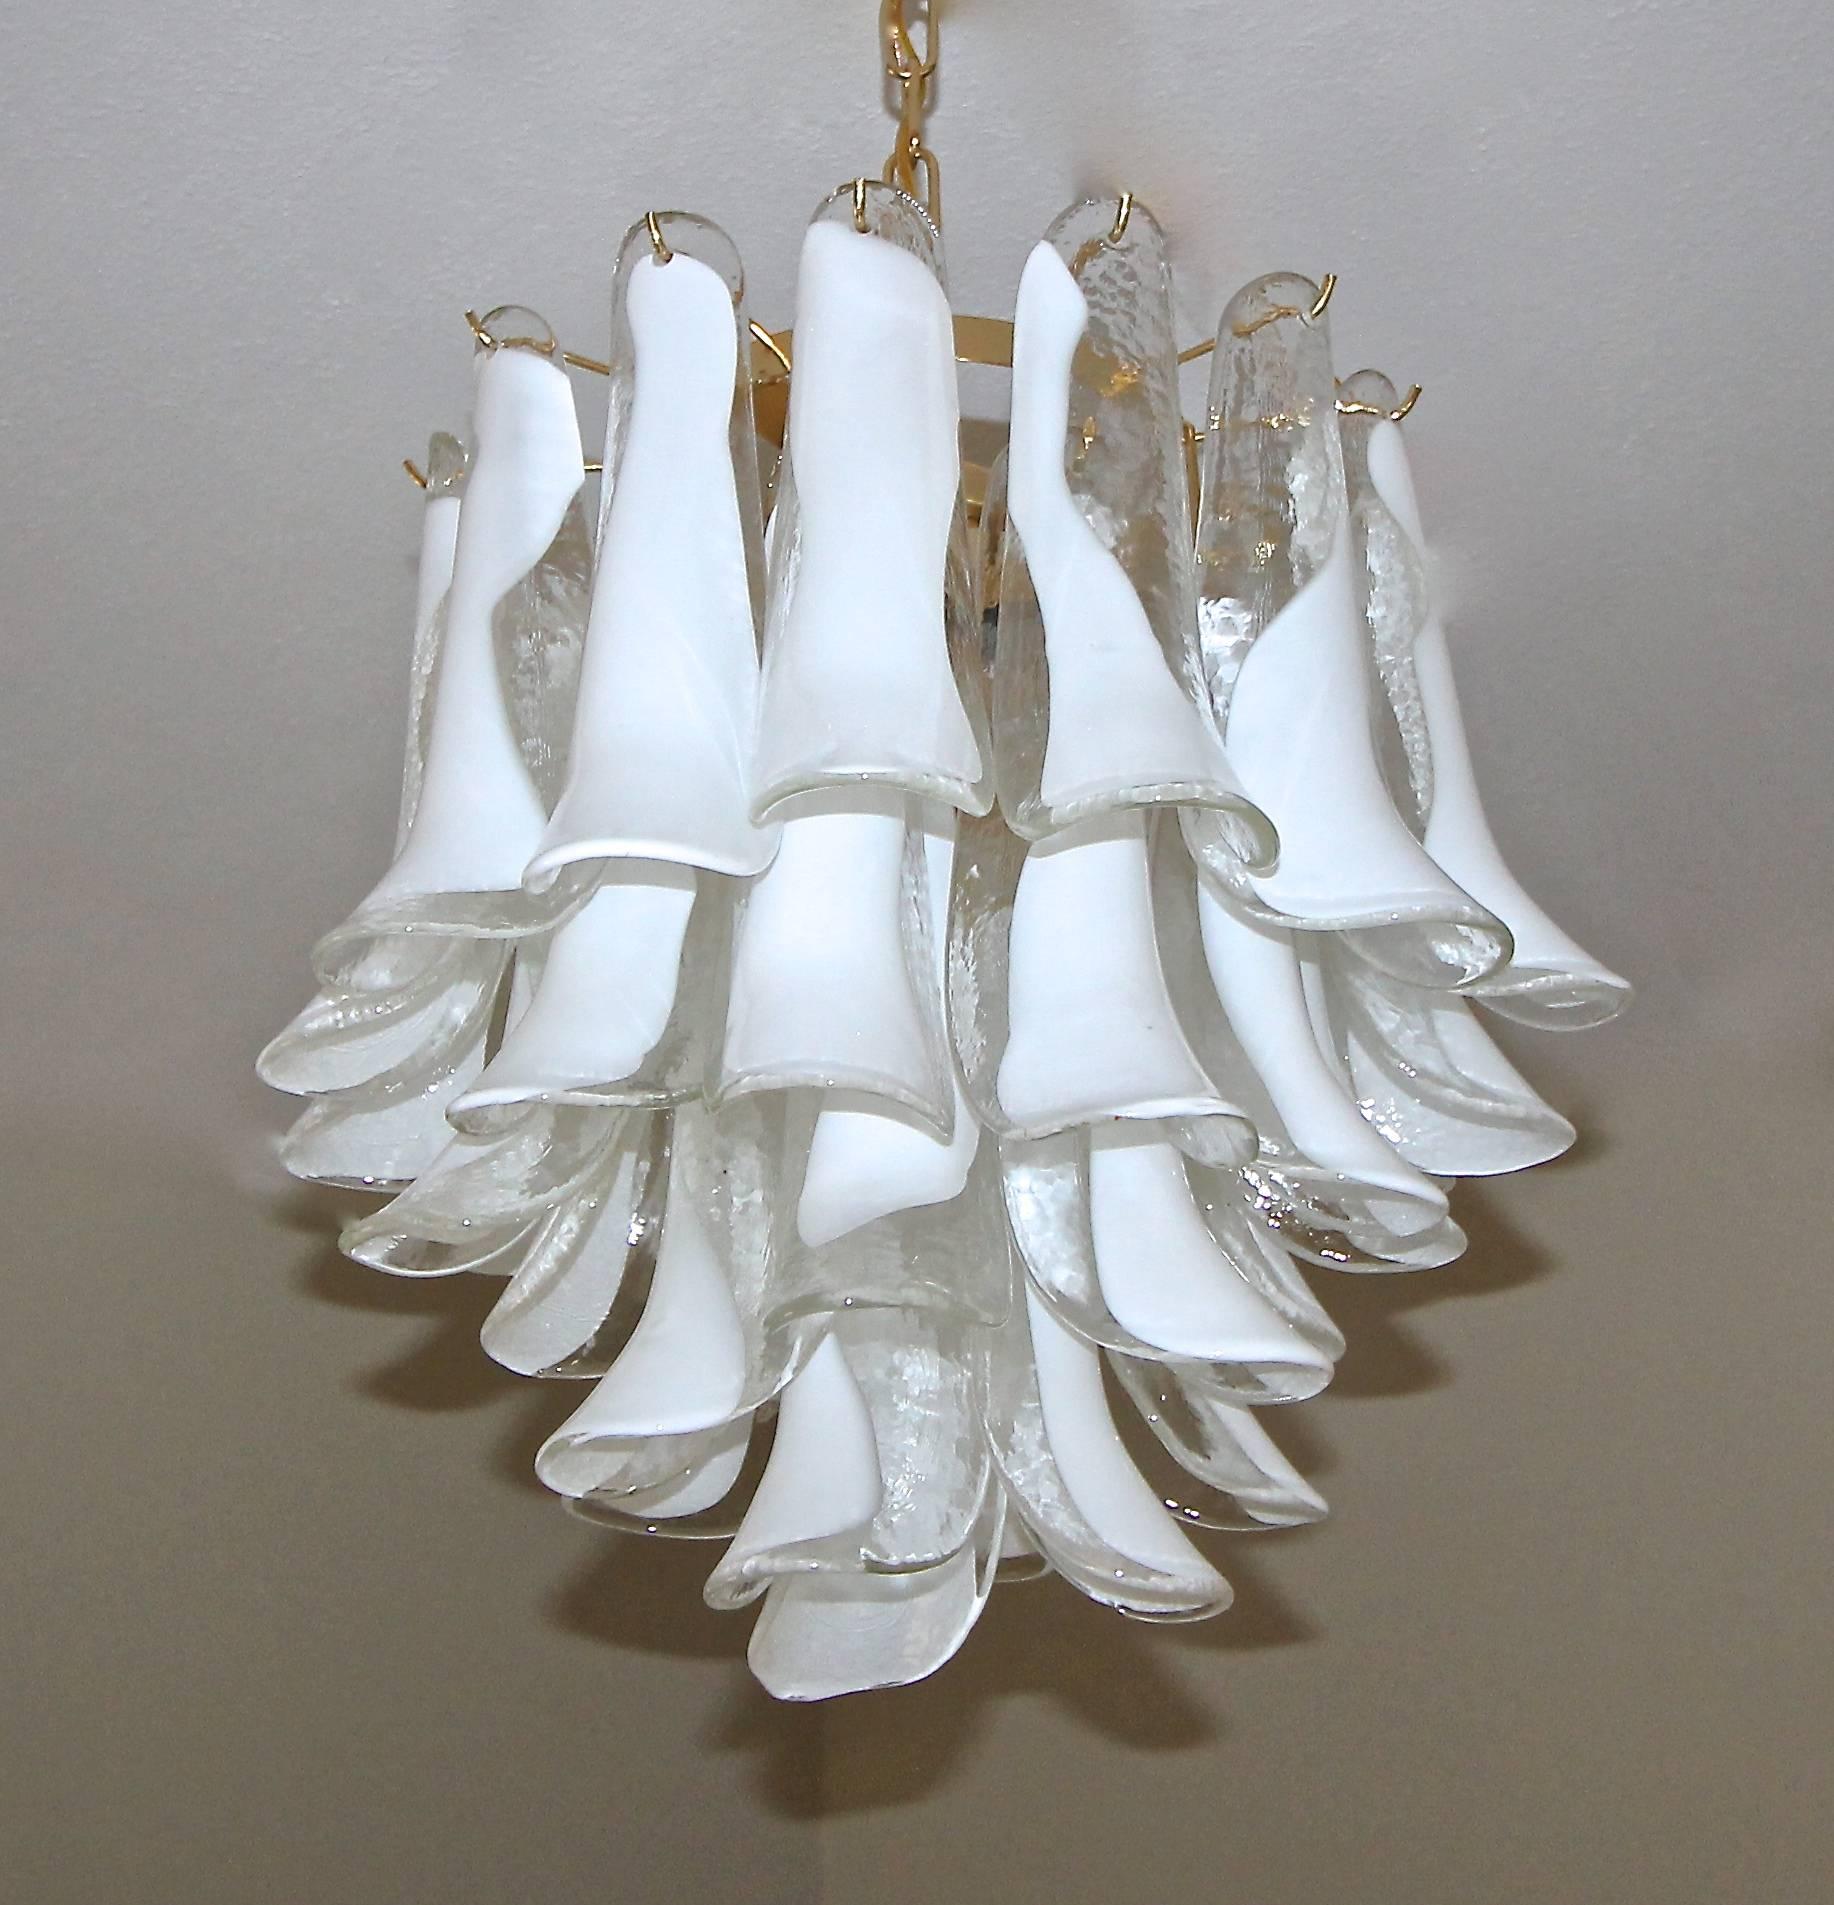 Mazzega chandelier with handblown clear and white glass 